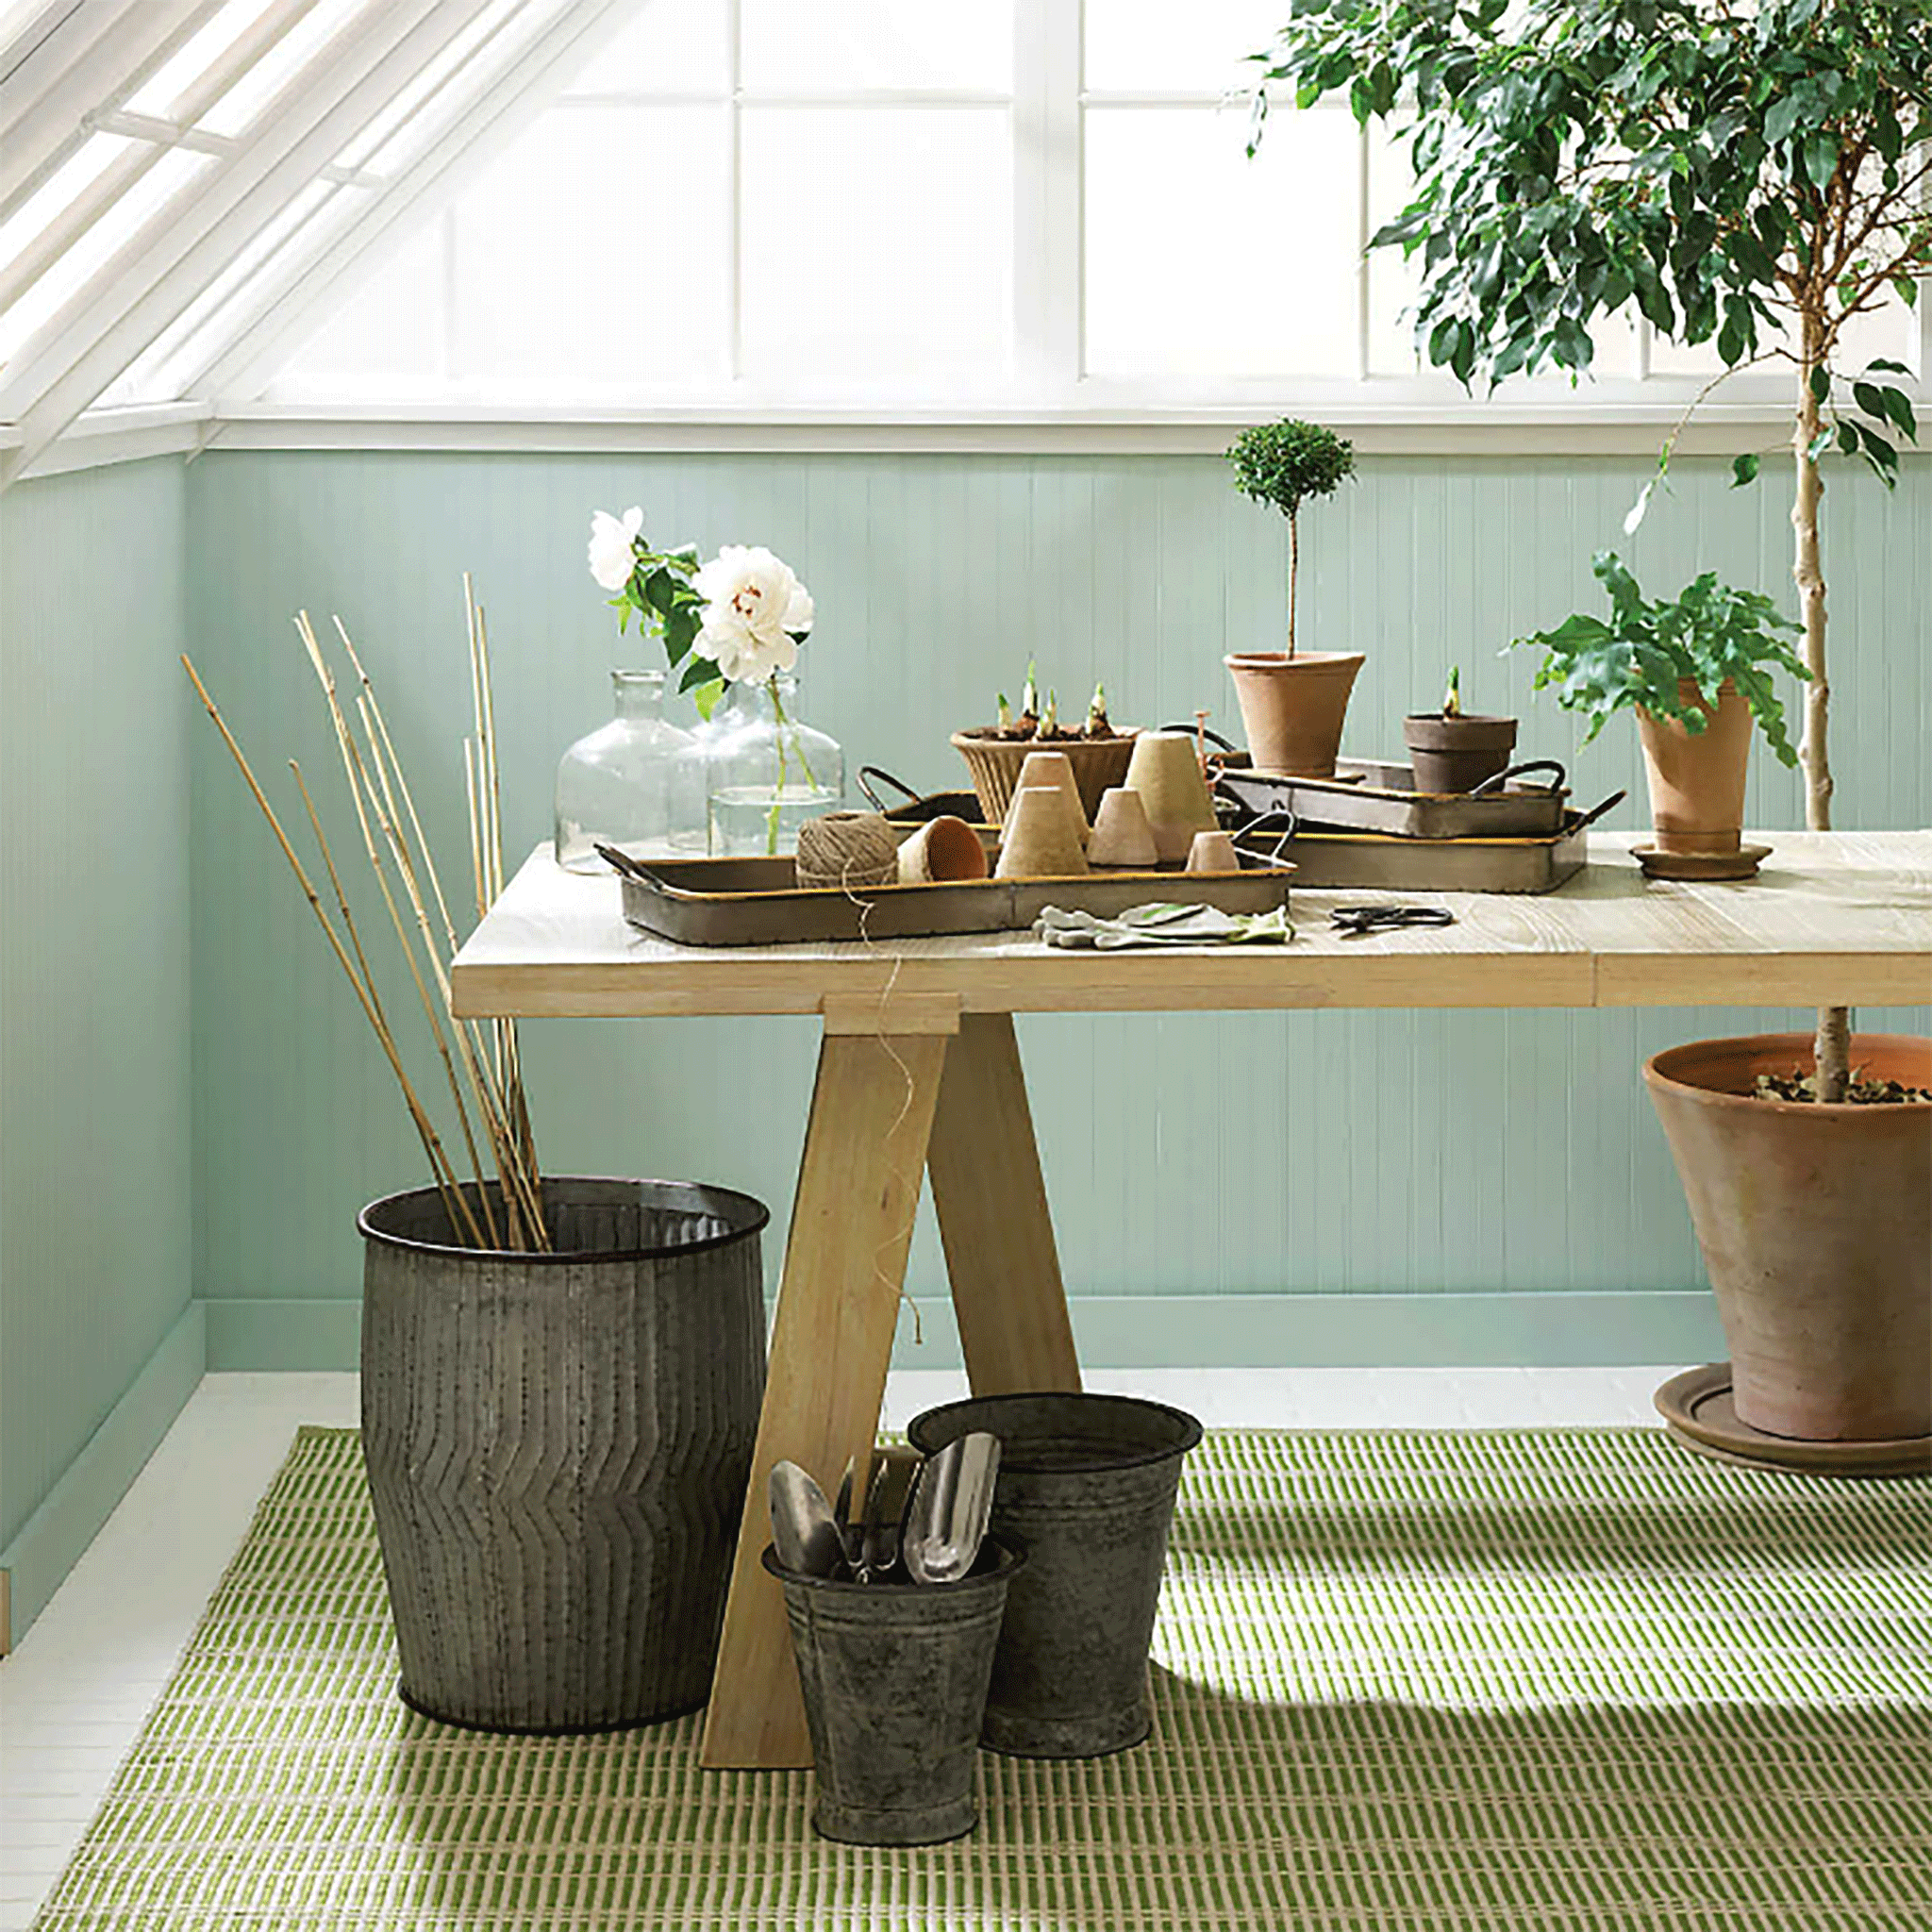 Maine Cottage Marlo Sprout Indoor/Outdoor Rug | Maine Cottage¨ 